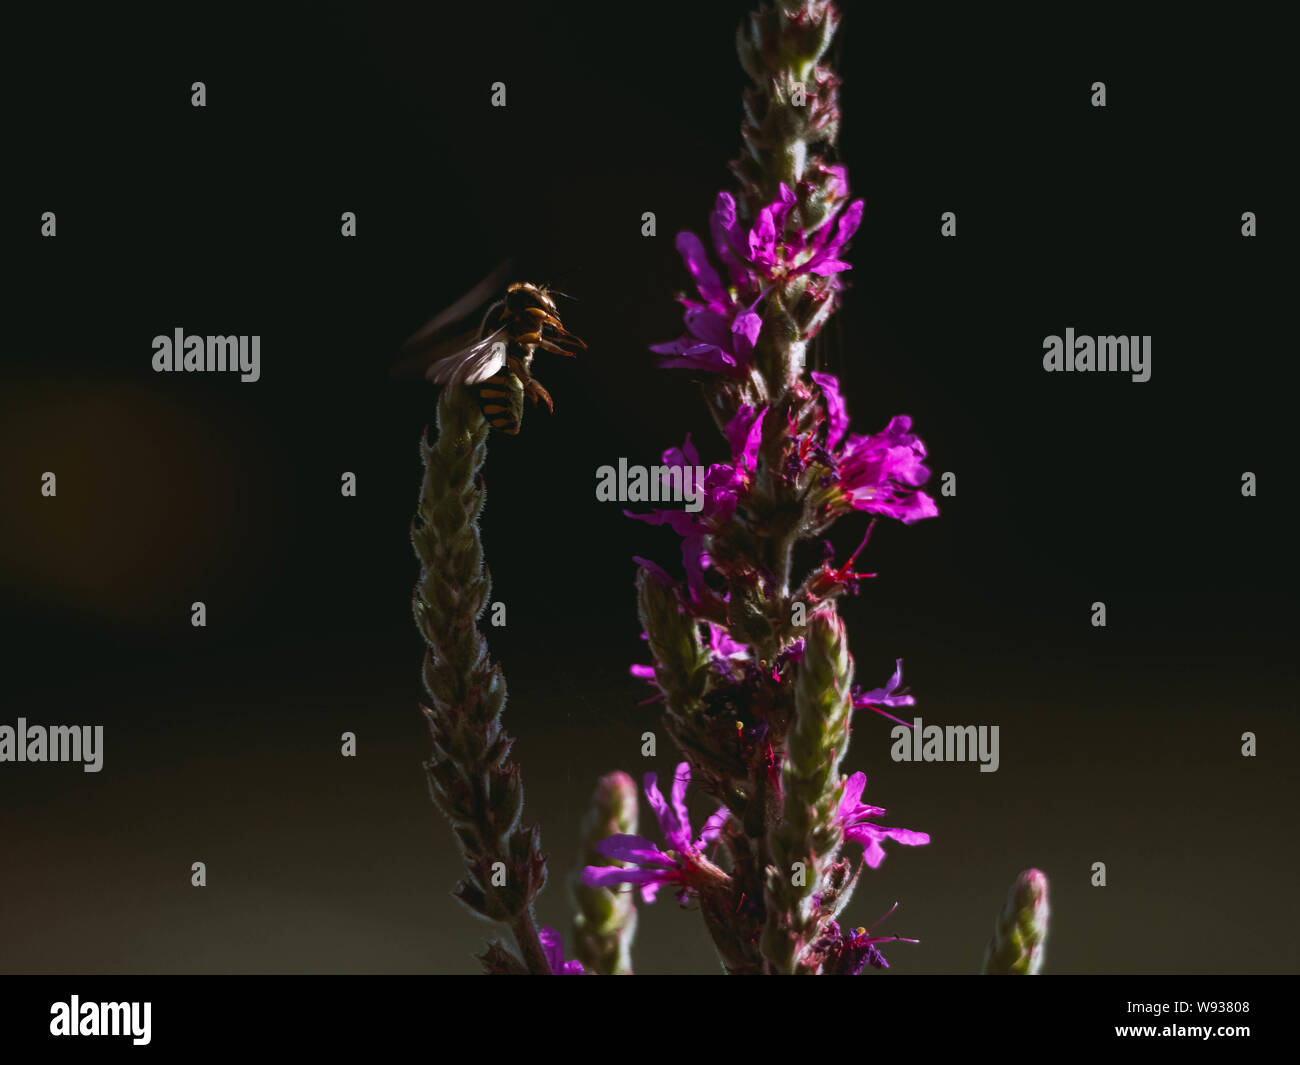 Hornet flying over a plant to eat the nectar and pollinate it Stock Photo